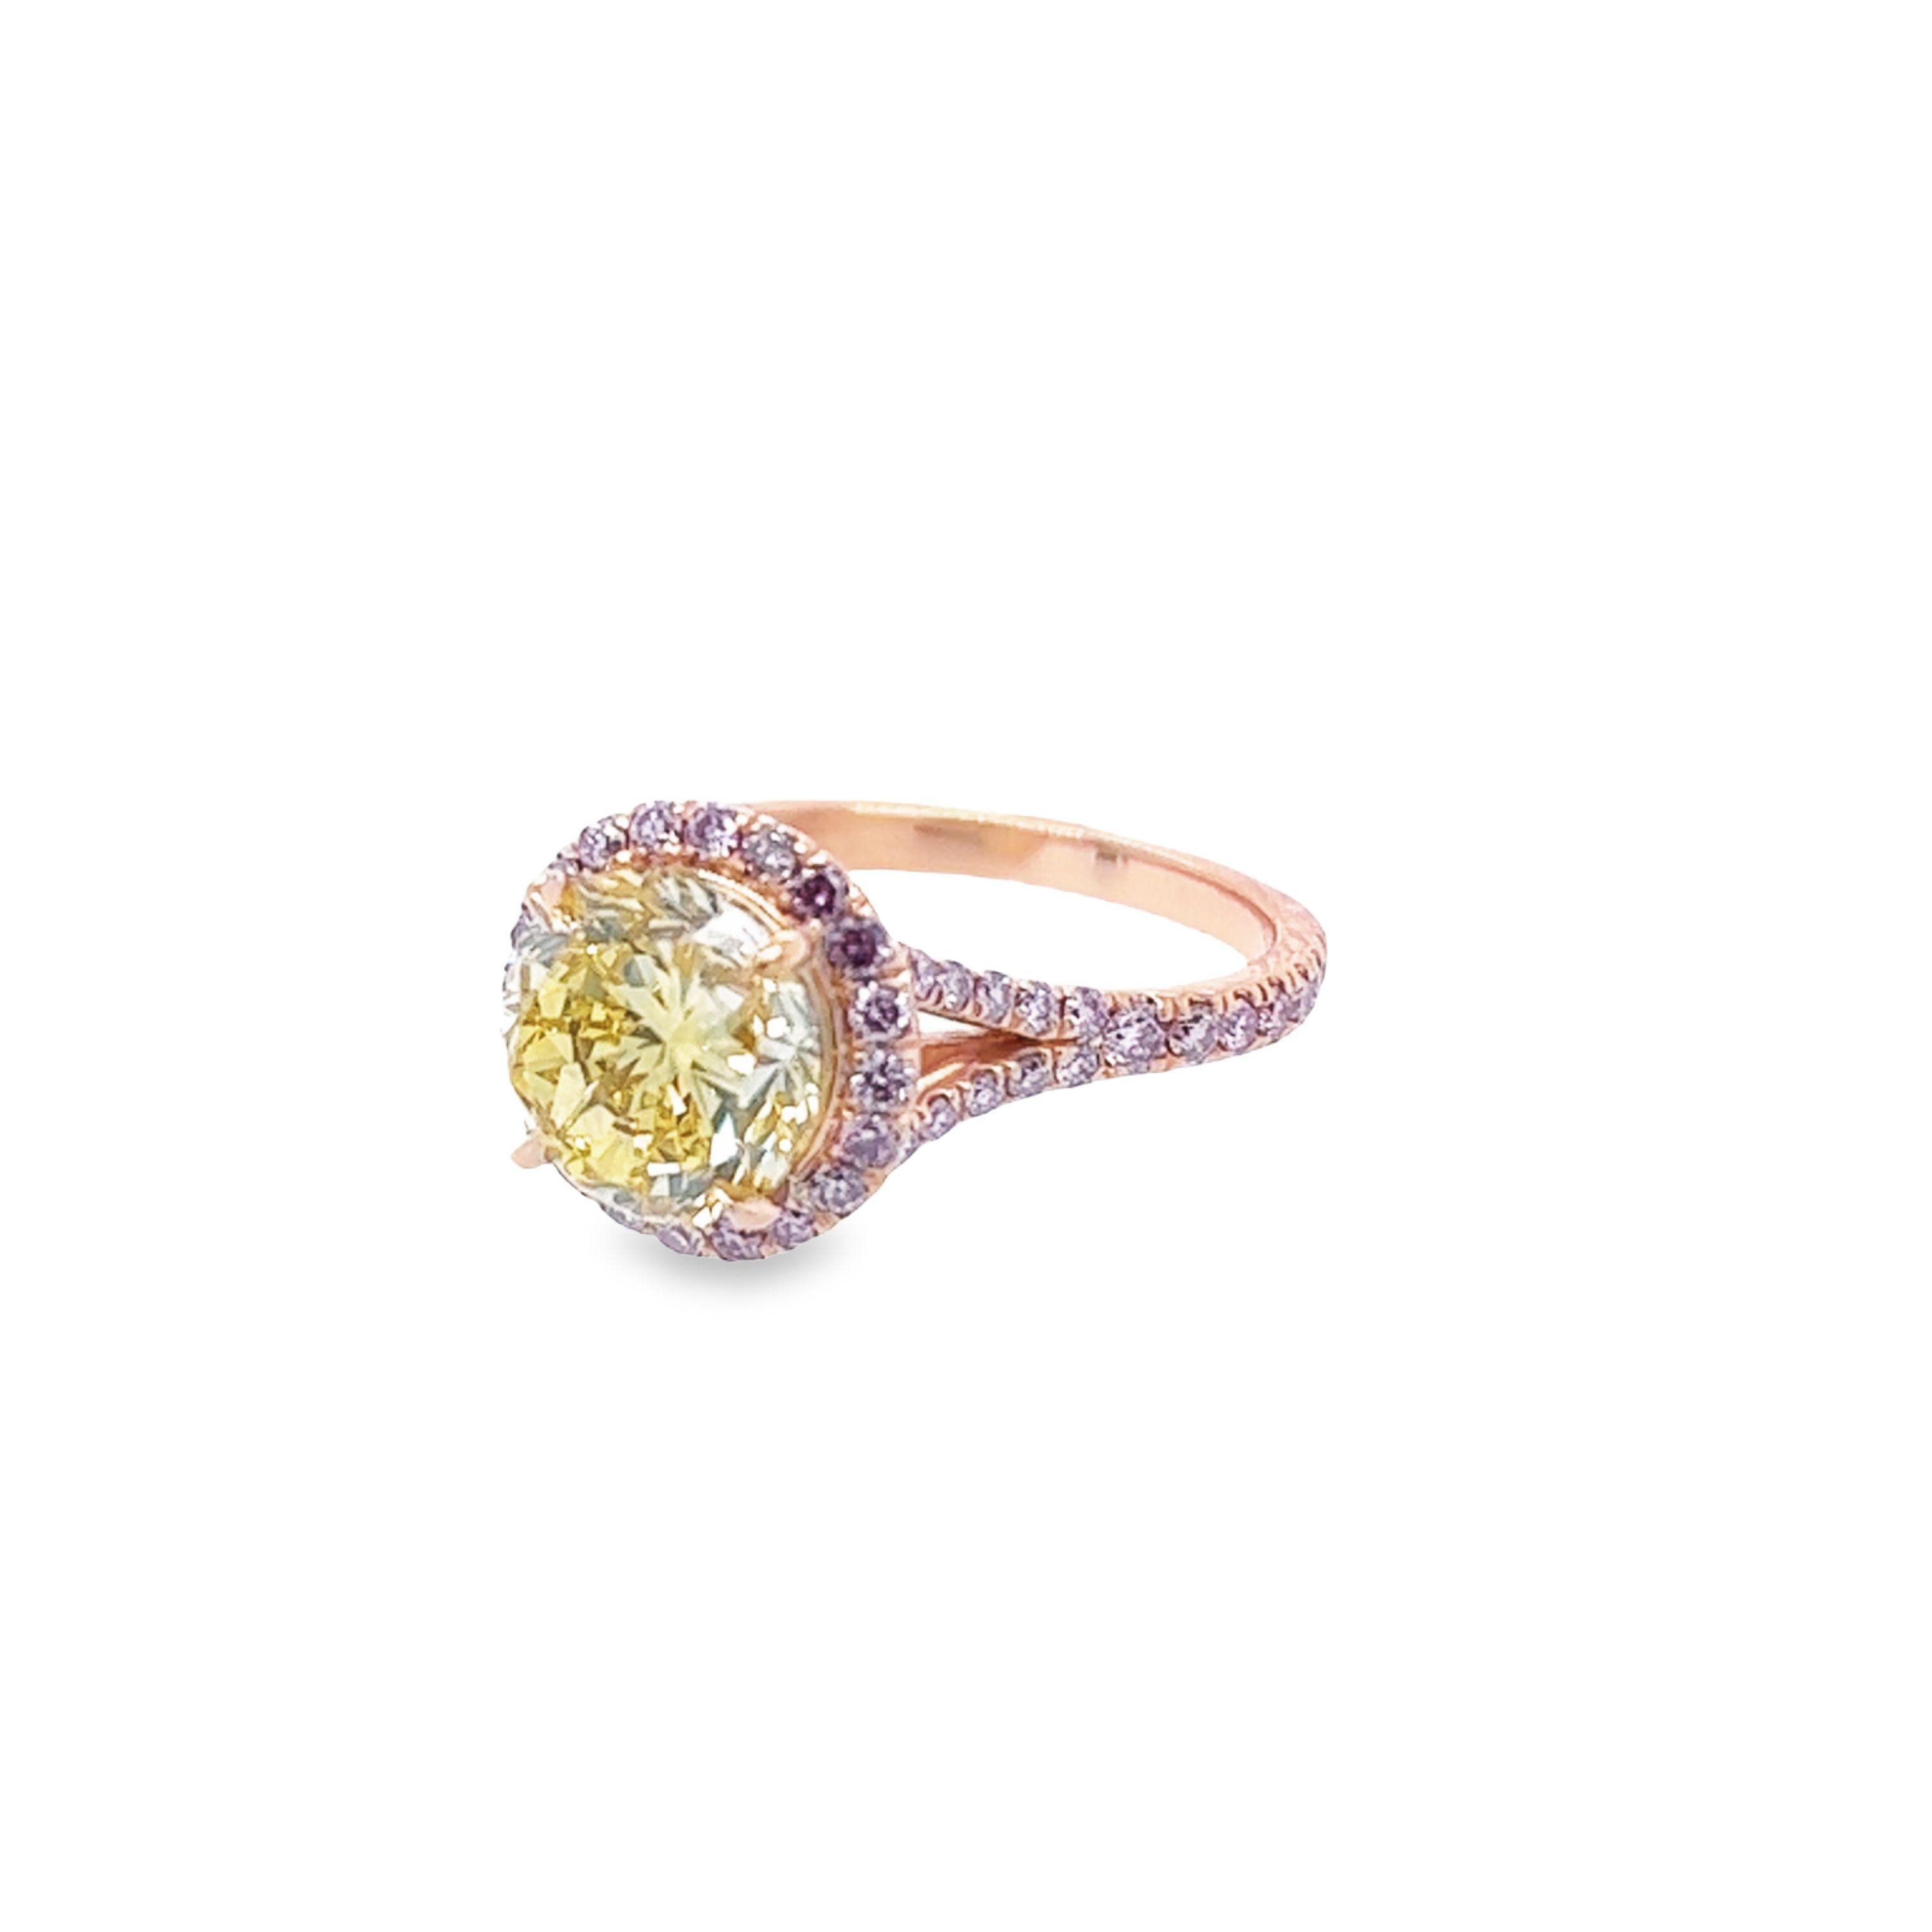 Rosenberg Diamonds & Co. 2.61 carat Round Brilliant Fancy Vivid Yellow Internally Flawless clarity is accompanied by a GIA certificate. This beautiful vibrant round diamond is set in a handmade 18k rose gold setting and completes the look with a